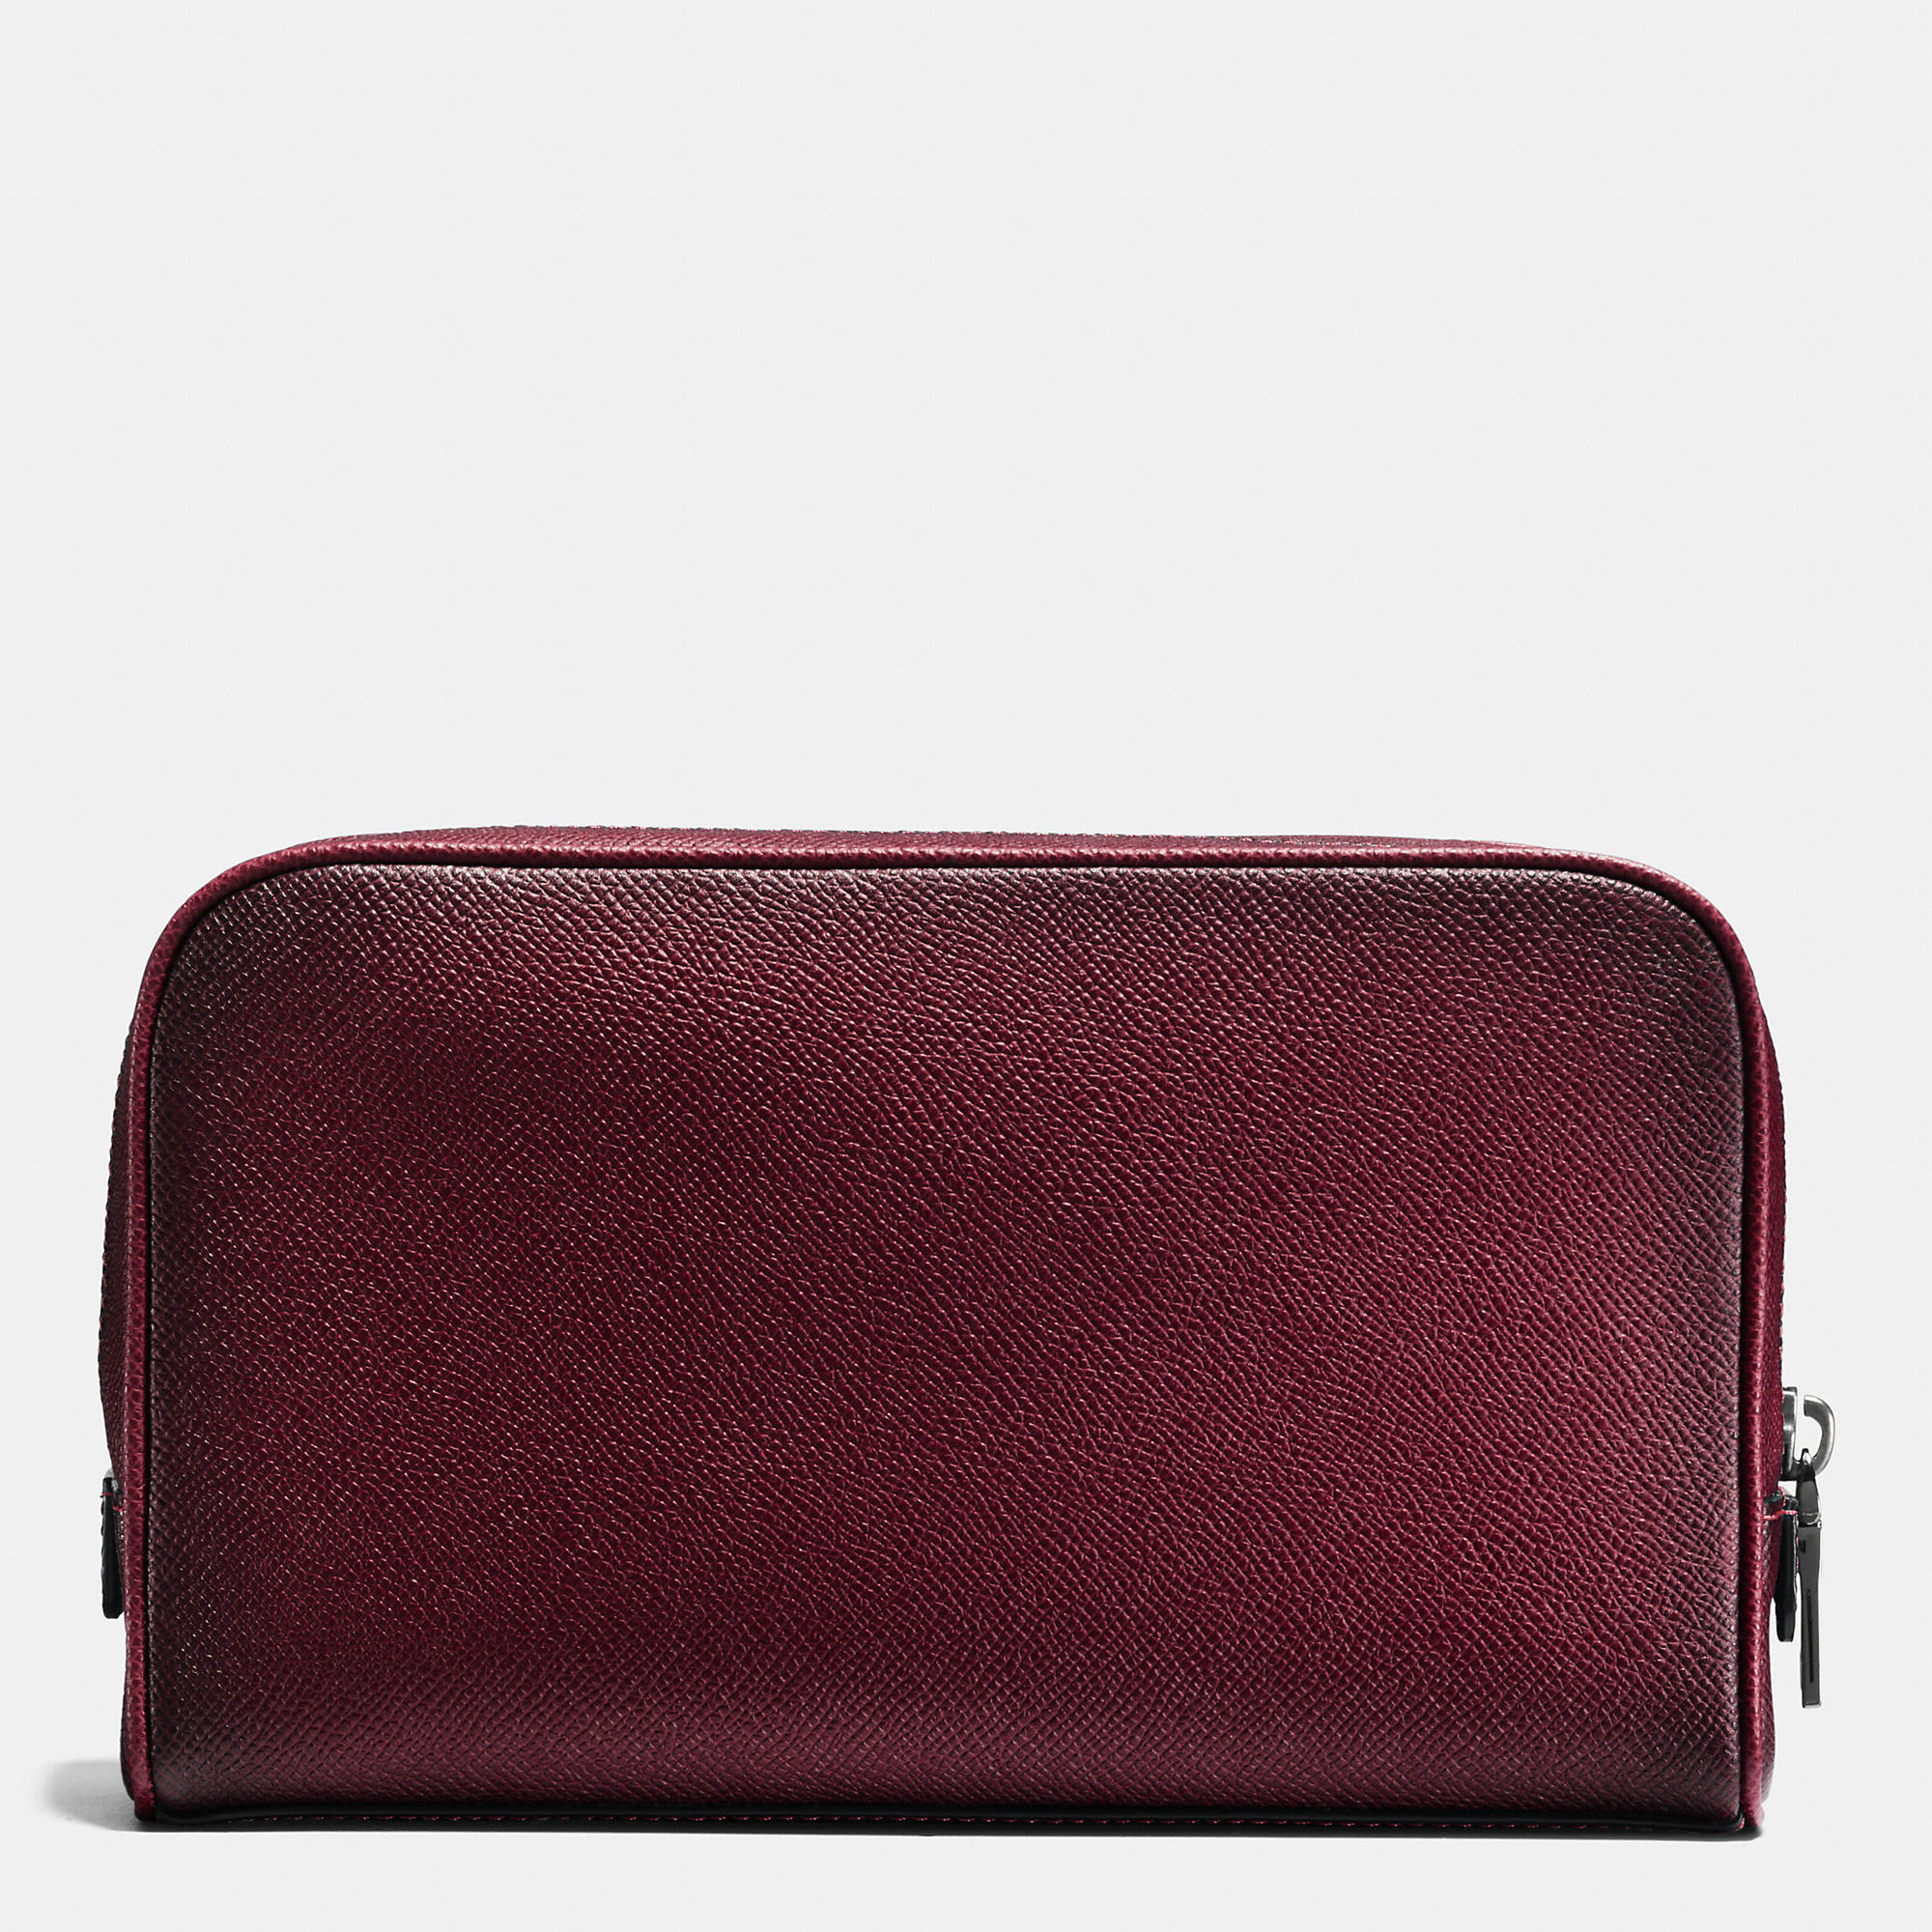 Lyst COACH Travel Kit In Burnished Crossgrain Leather in Red